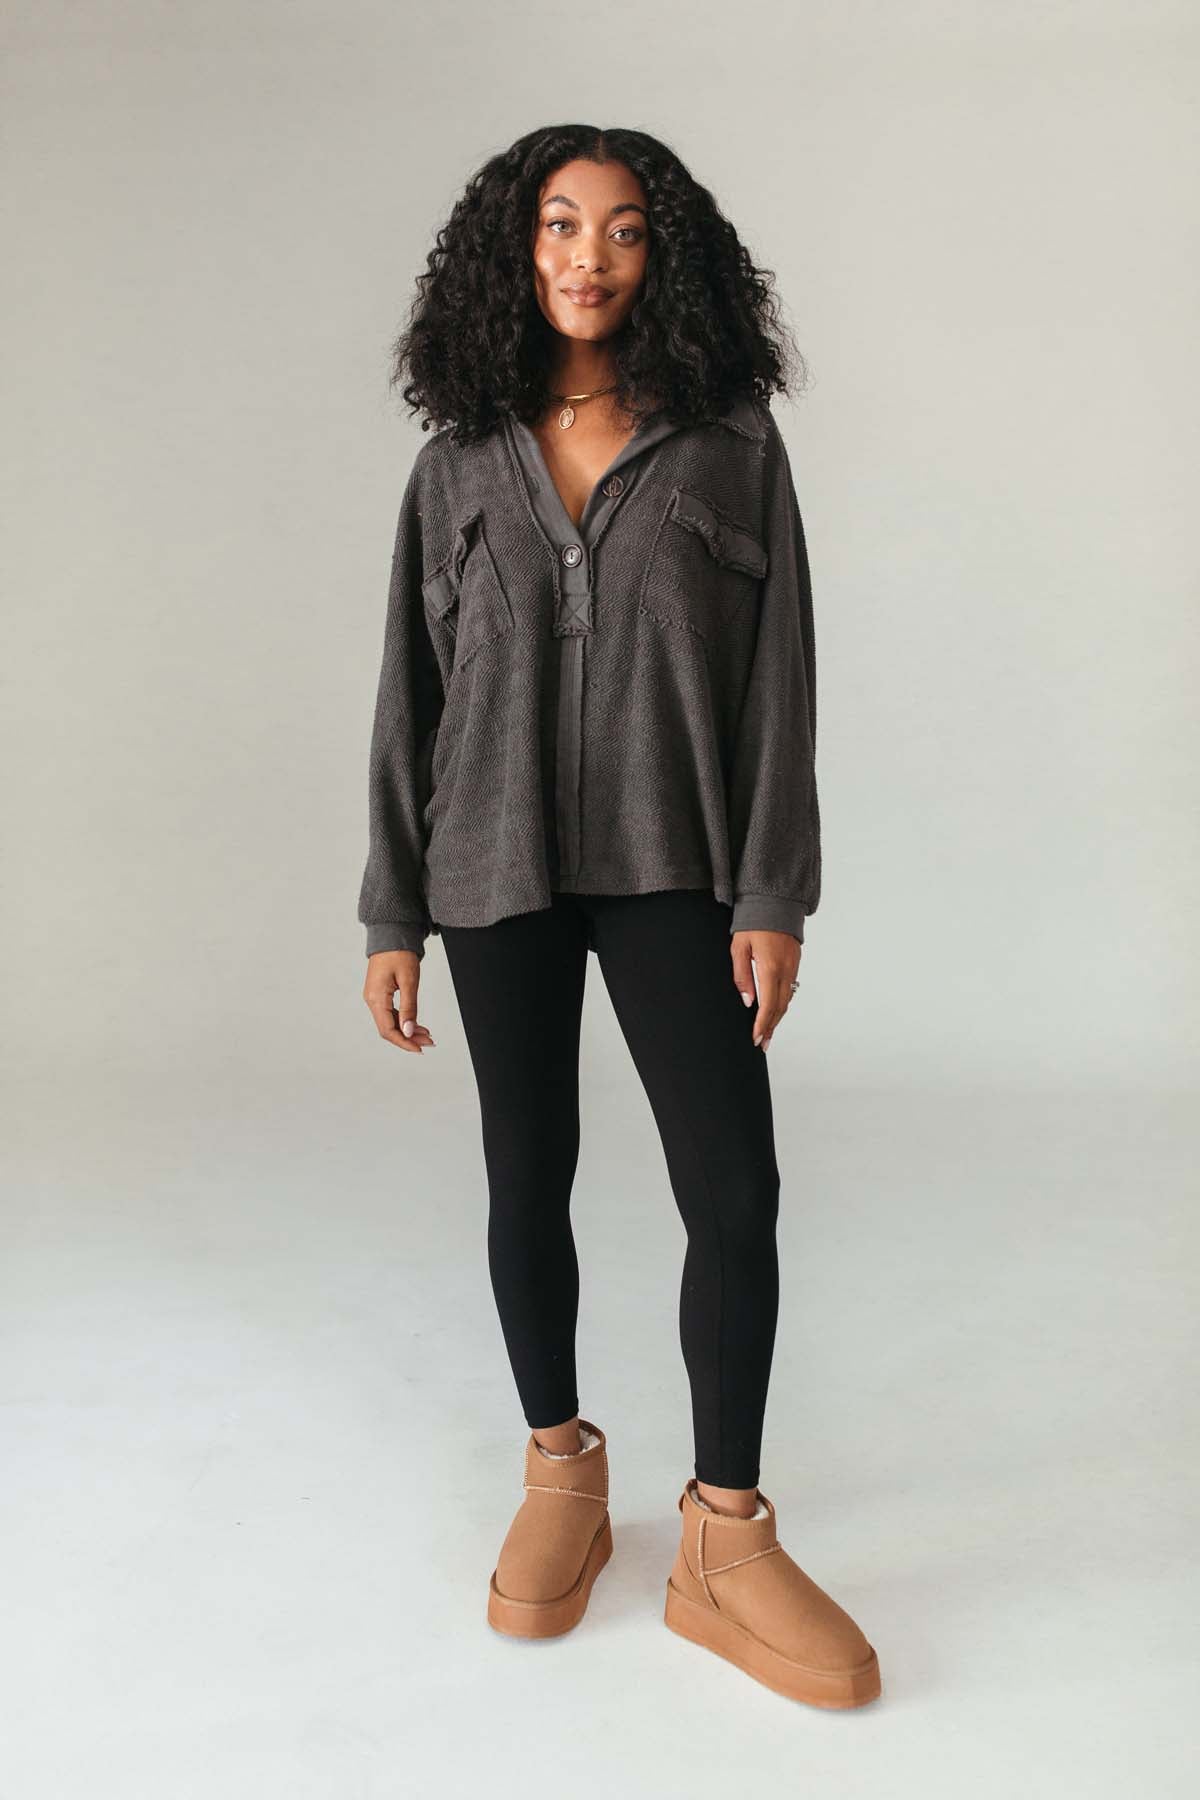 Willow Oversized Charcoal Top, alternate, color, Charcoal